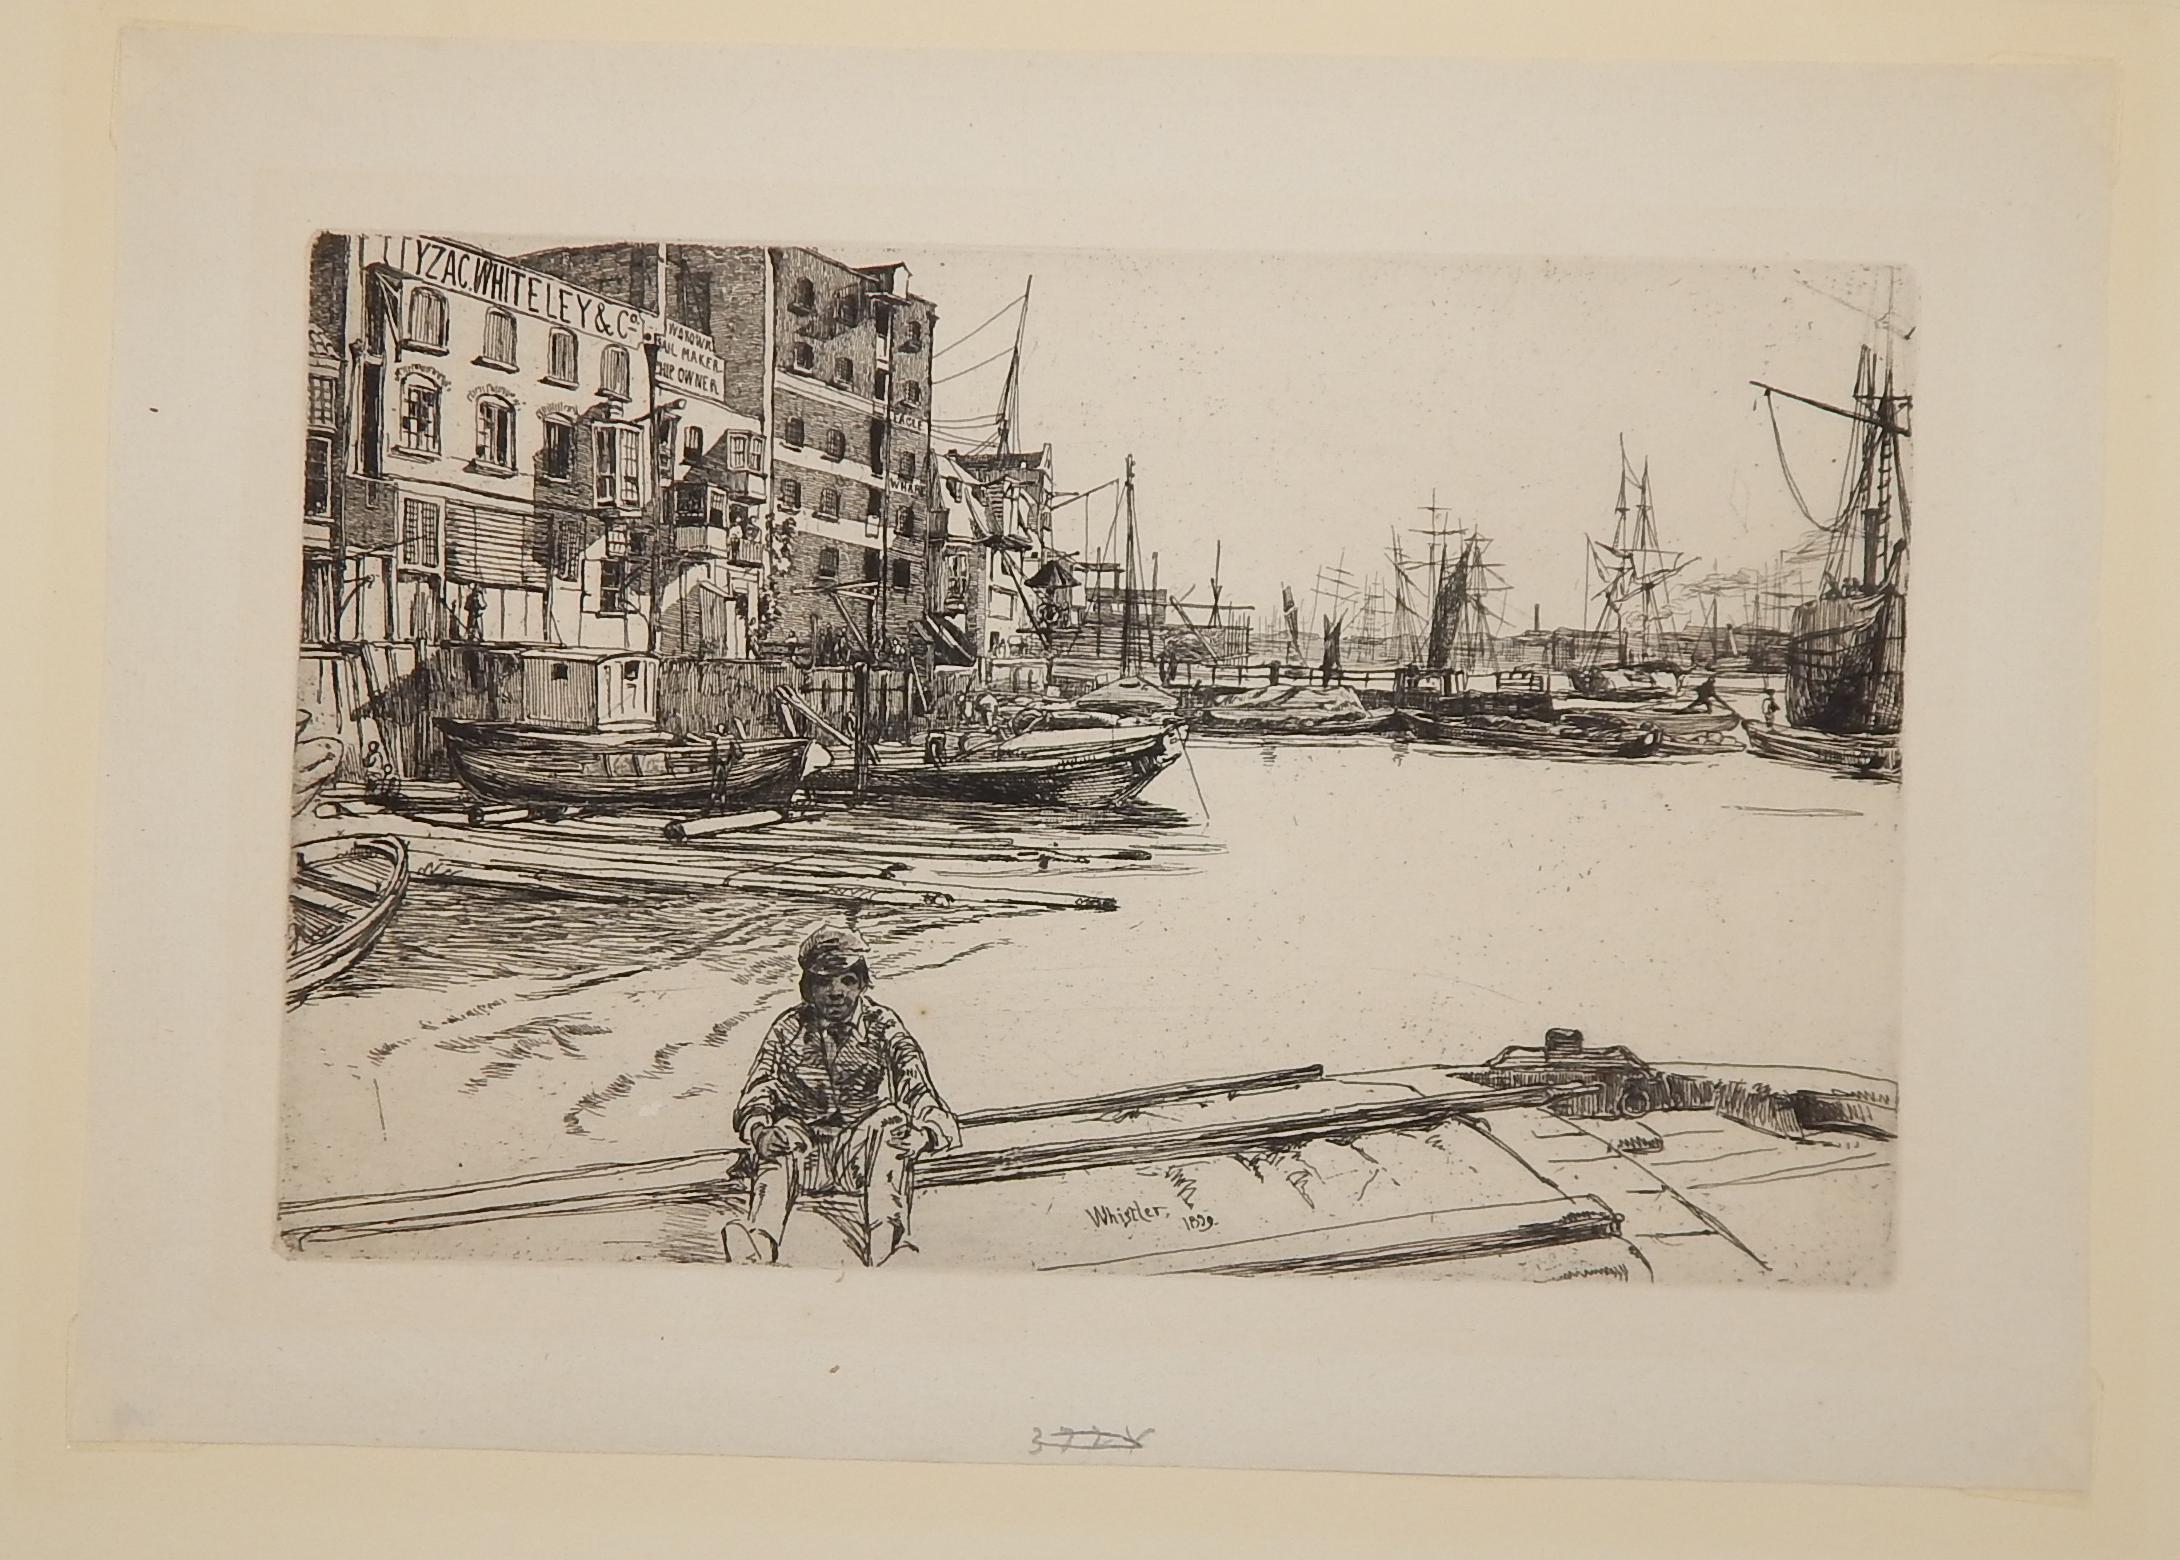 James Abbott McNeill Whistler, (1834-1903)
Etching and drypoint. Signed in the plate lower center and dated 1859.
Image measures: 5 1/4